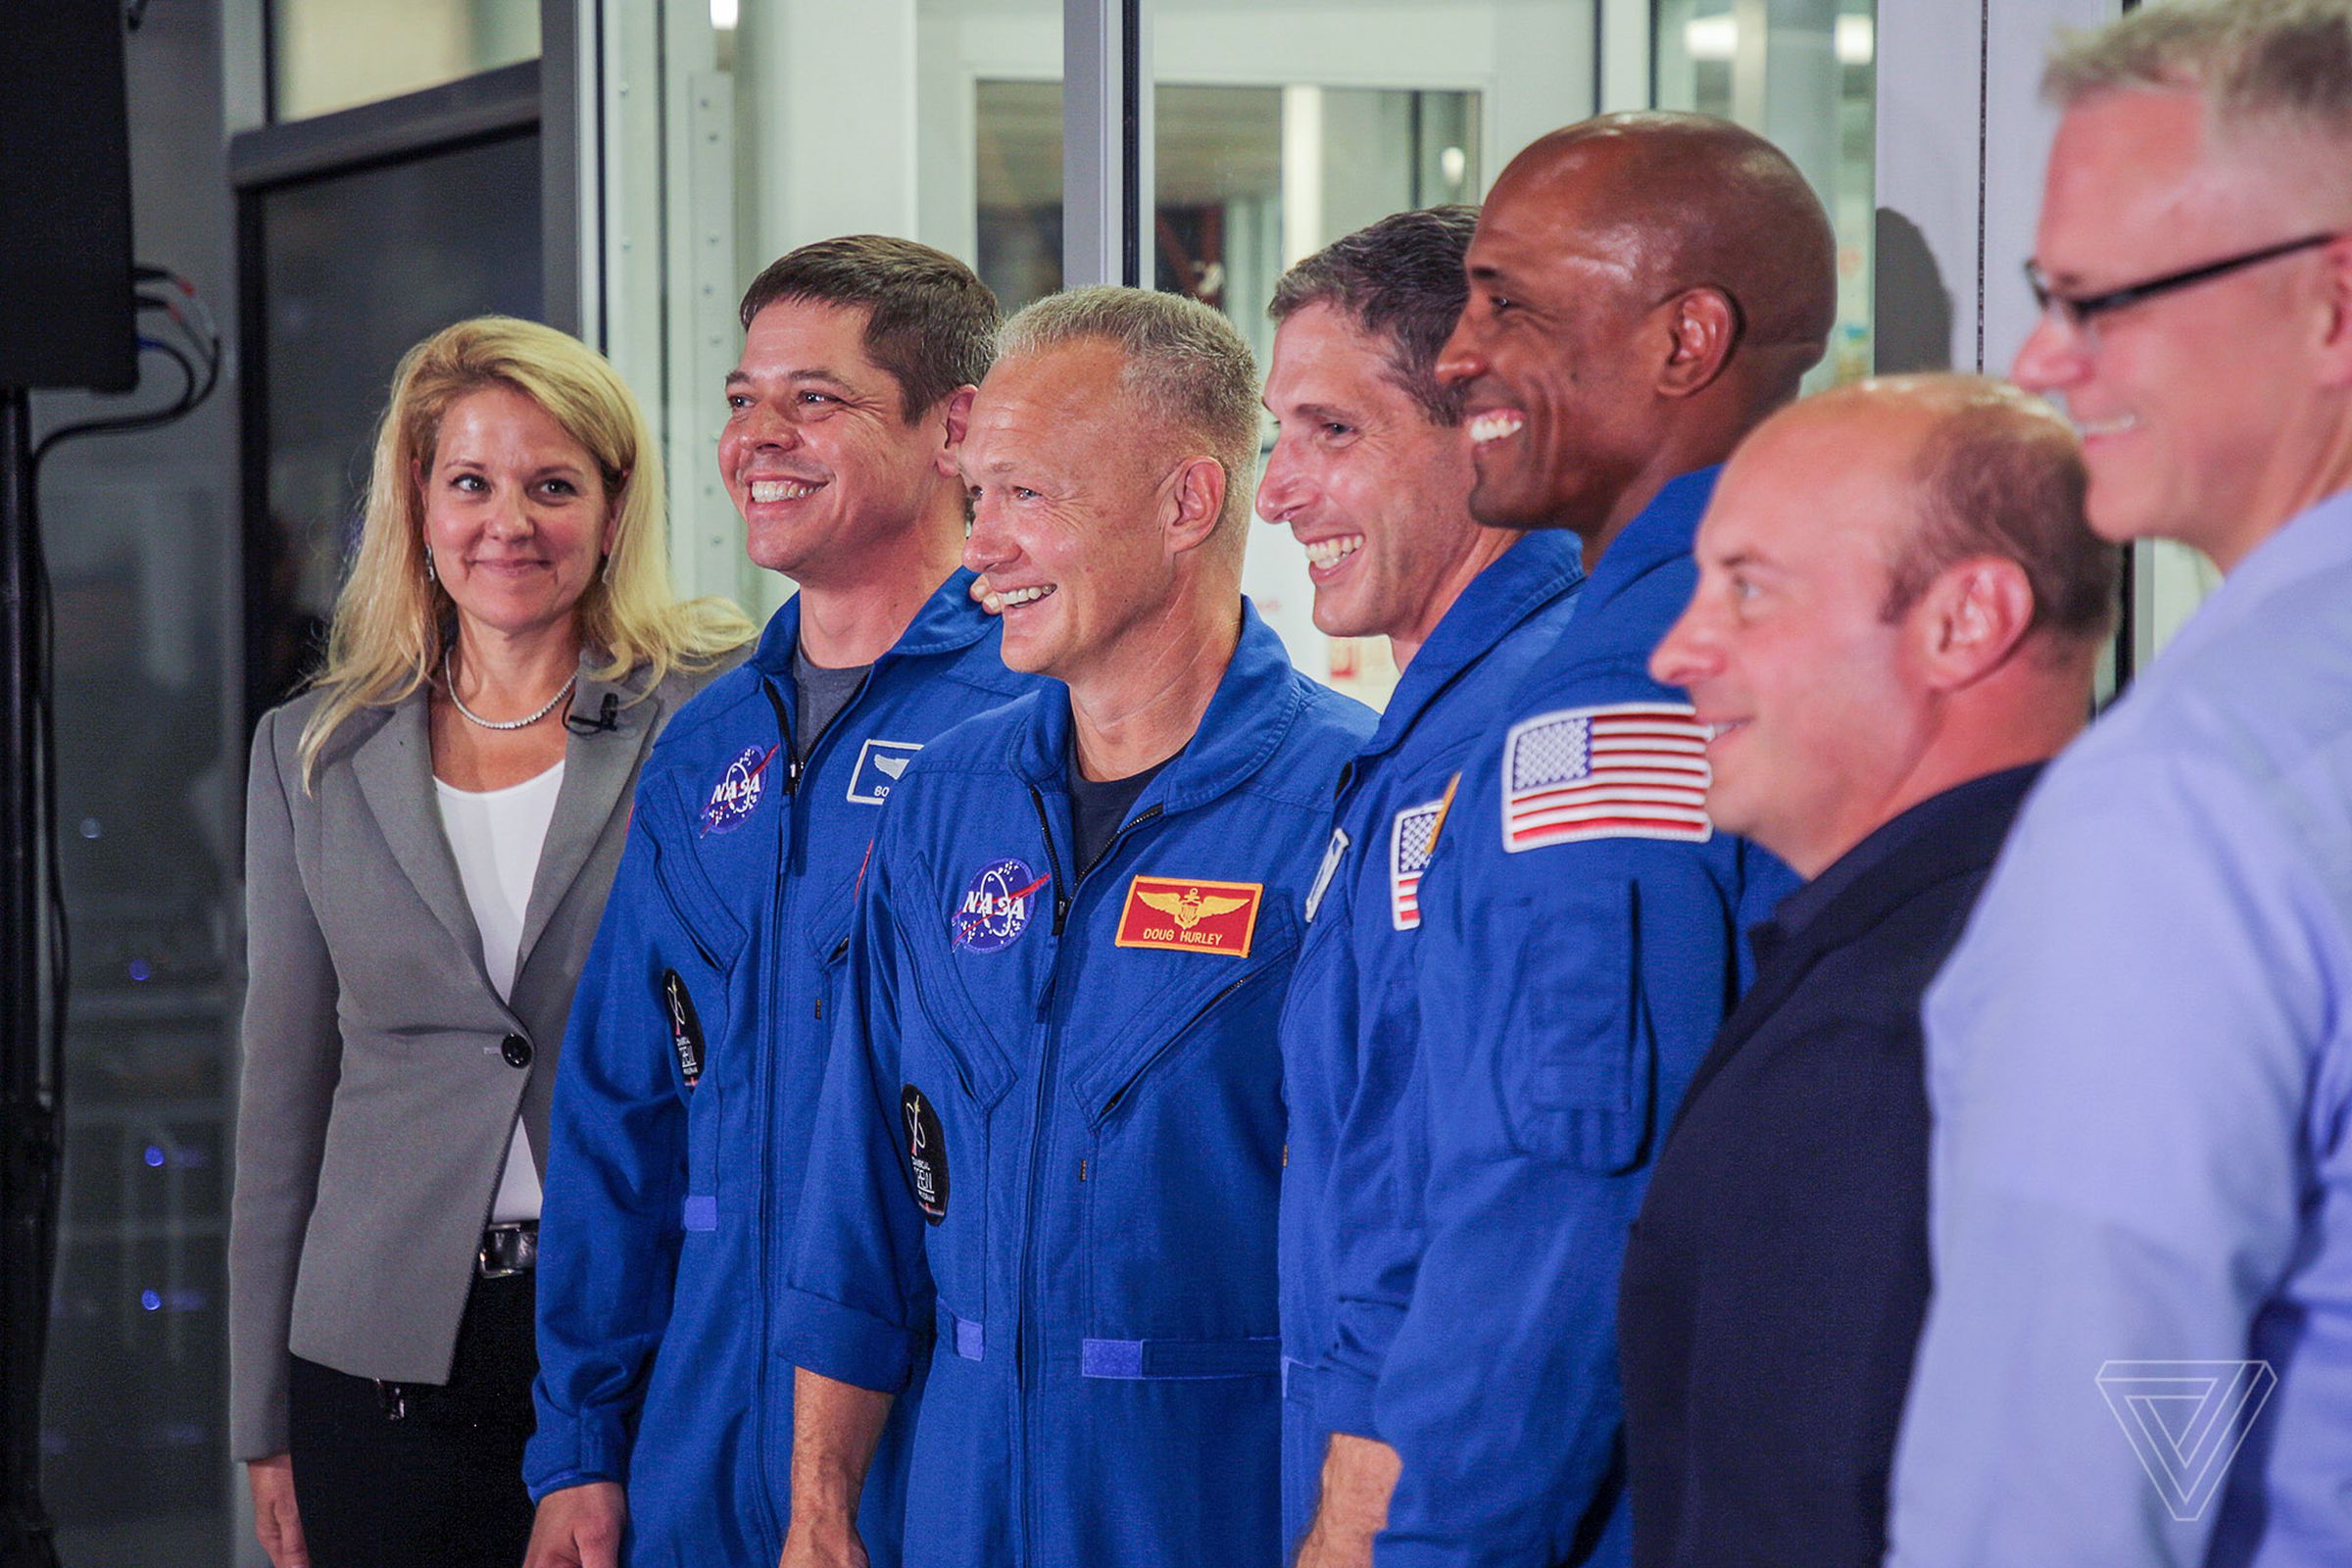 From left to right: SpaceX president Gwynne Shotwell; NASA astronauts Bob Behnken, Doug Hurley, Mike Hopkins, and Victor Glover; Garrett Reisman, SpaceX’s senior adviser for human spaceflight; and Benjamin Reed, SpaceX’s director of crew mission management.